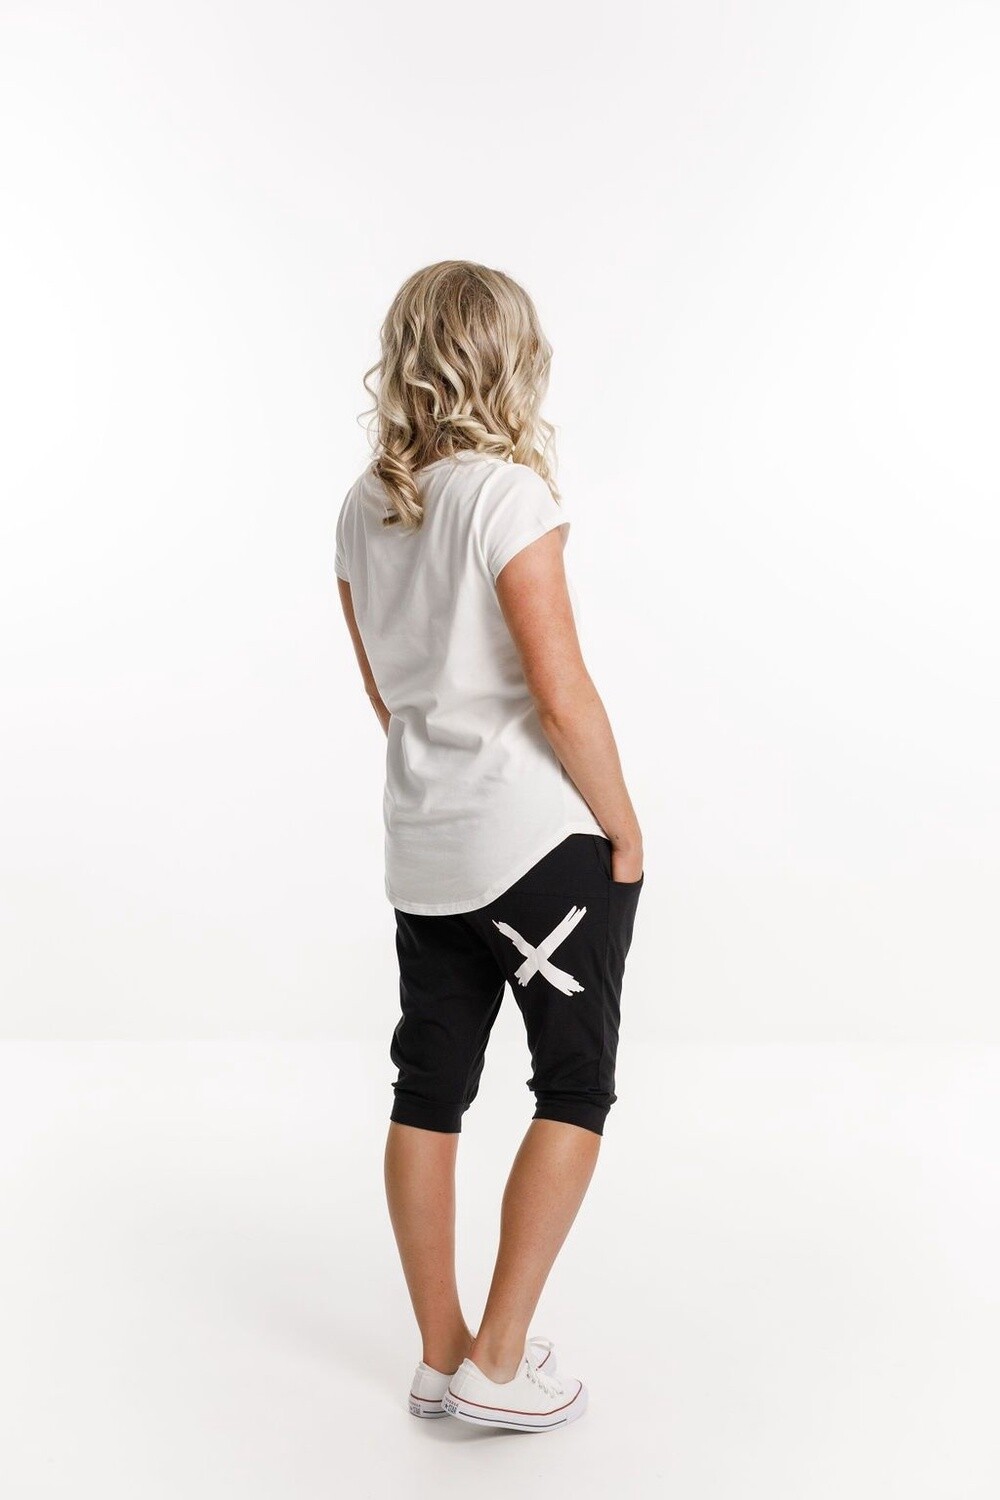 Home-lee 3/4 apartment pants- black with white x